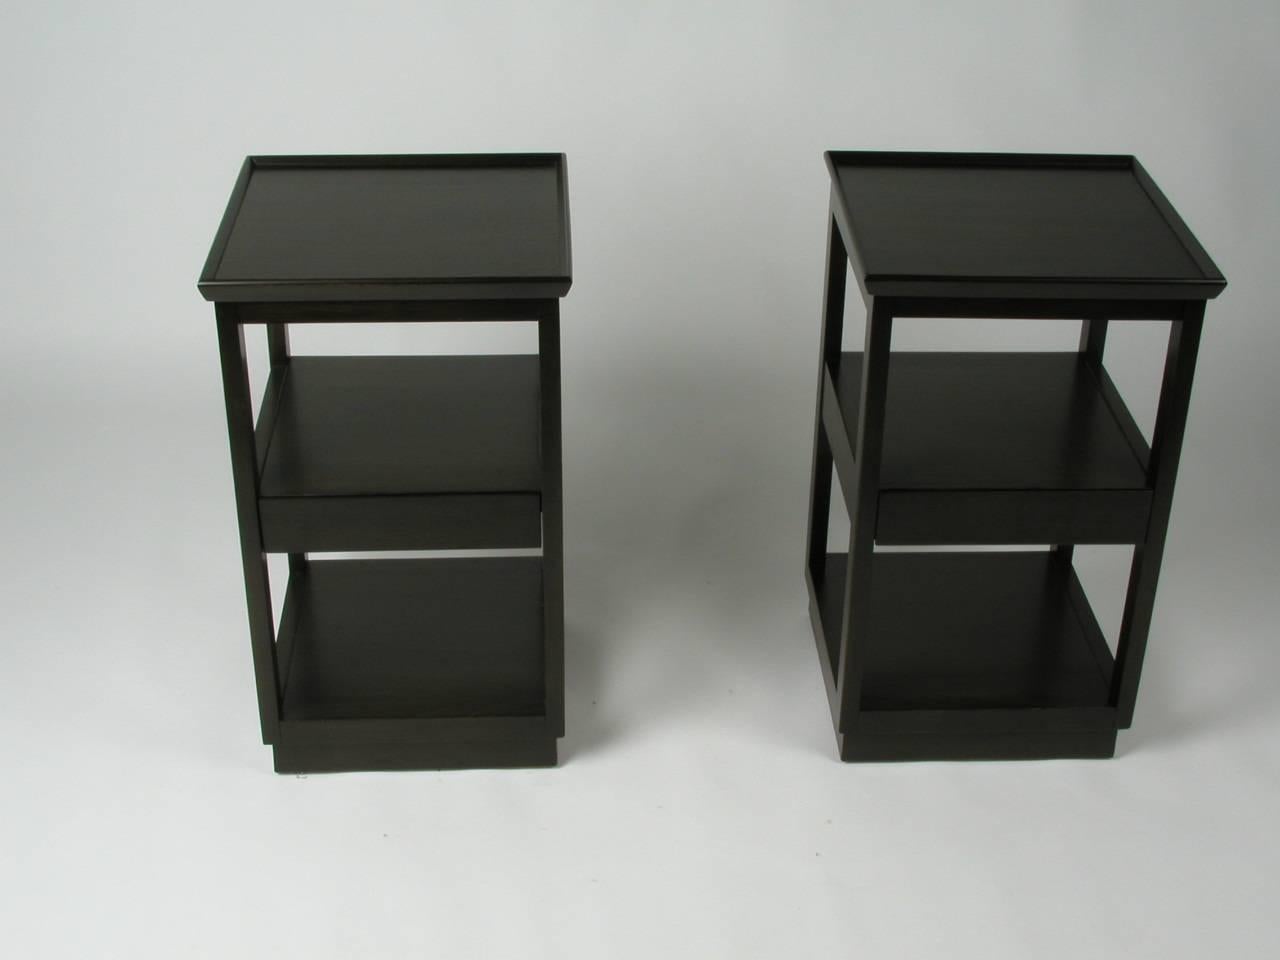 American Pair of Edward Wormley for Drexel Precedent Collection End Tables with Drawer